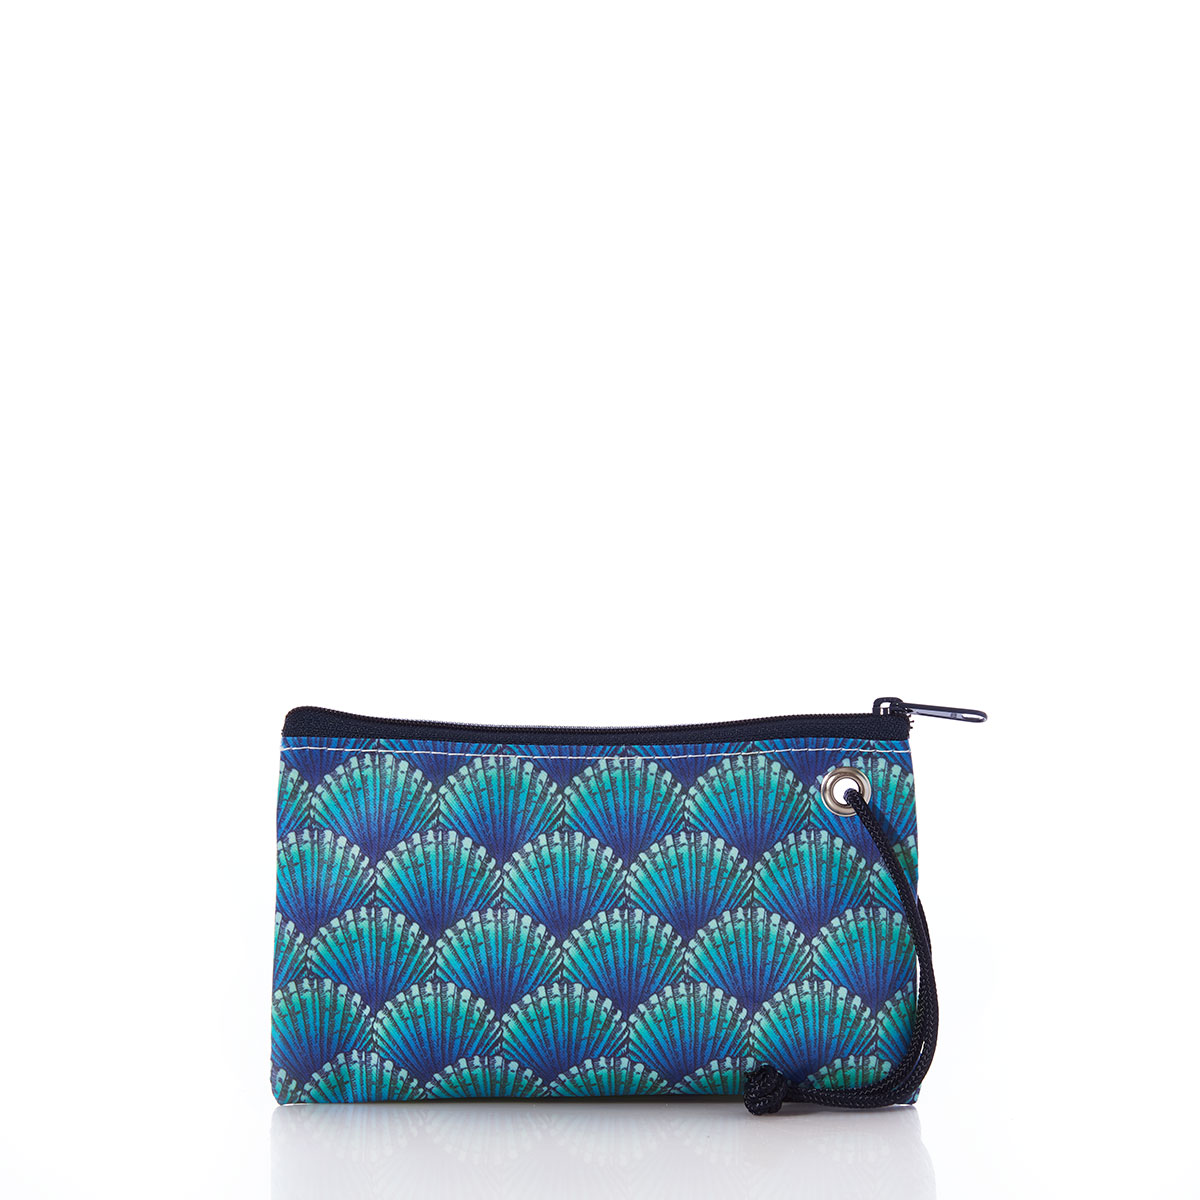 a recycled sail cloth wristlet is printed with a repeating pattern of blue scallop shells